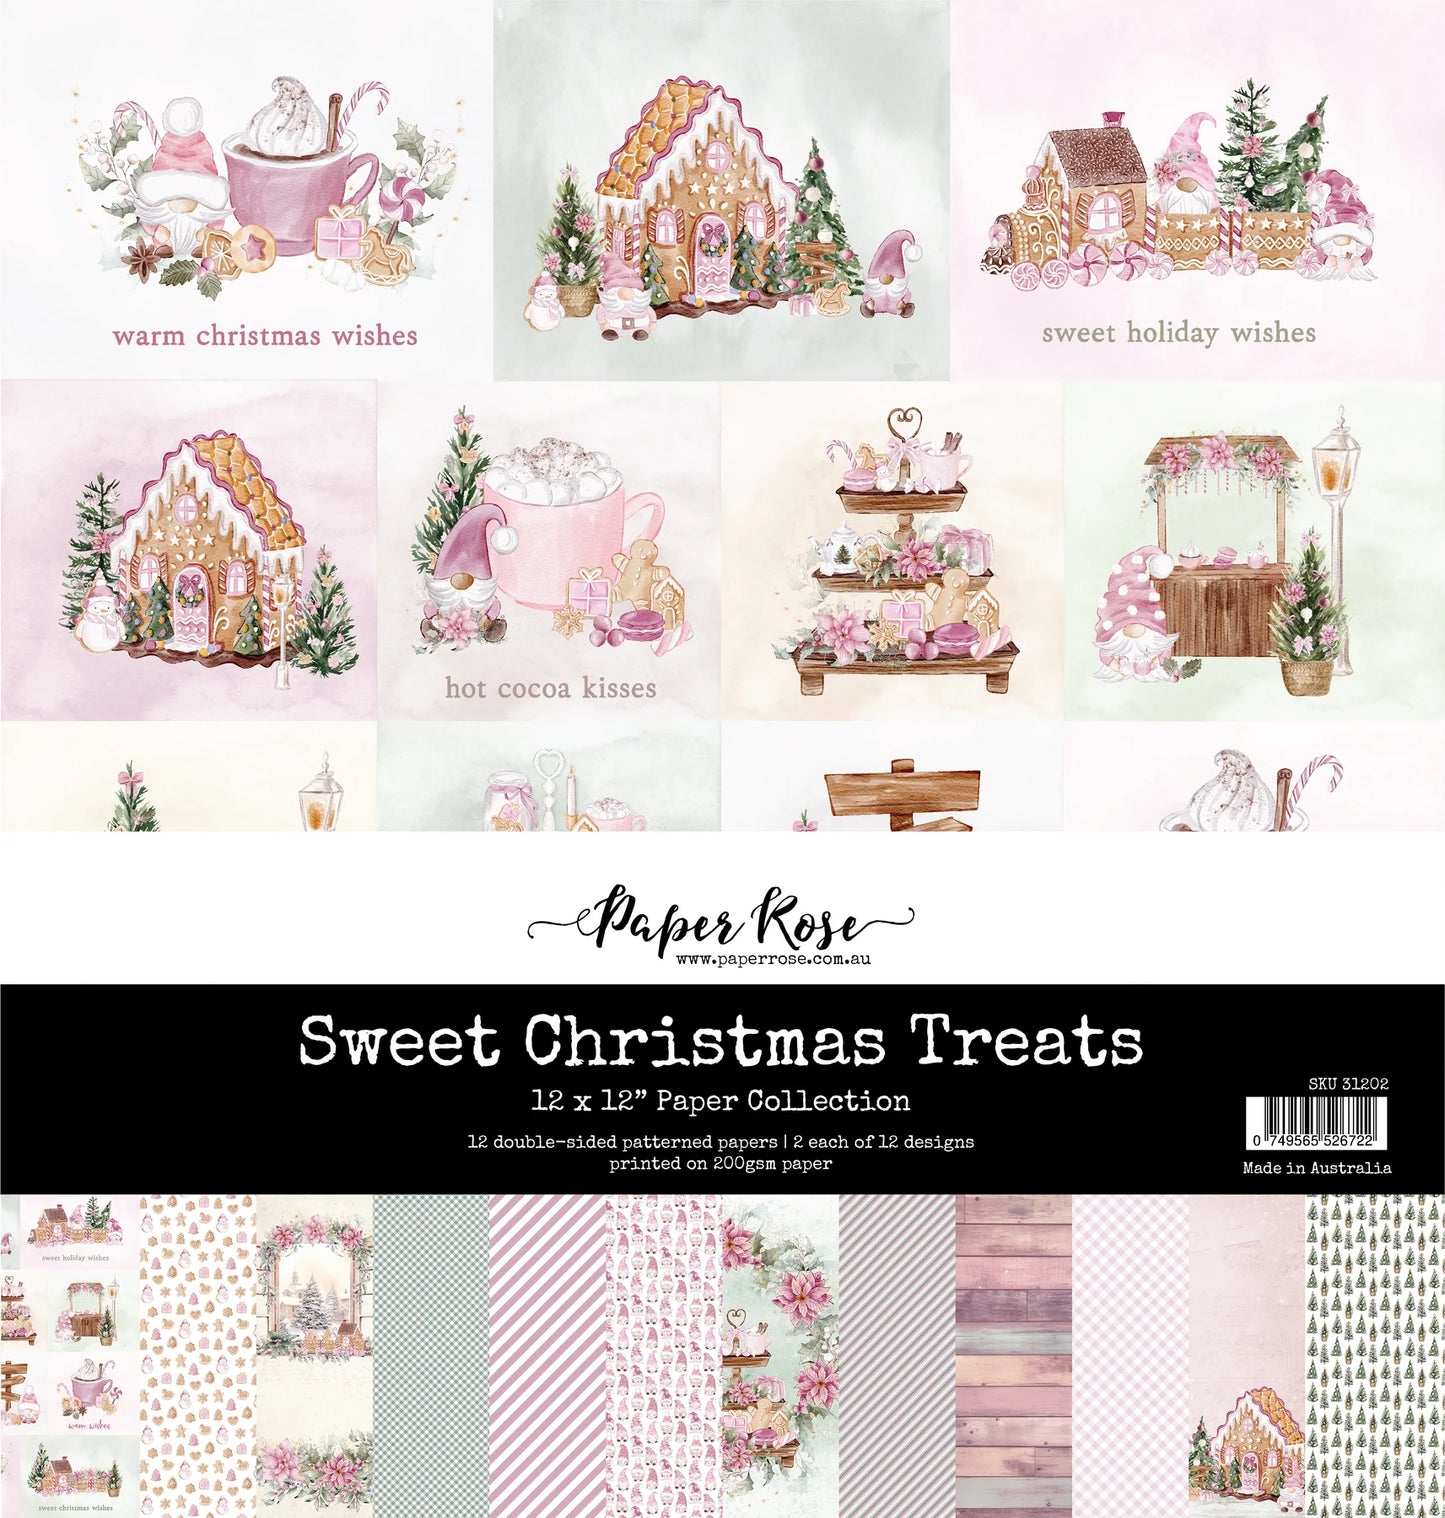 Paper Rose Studio 12x12 Double Sided Paper - Sweet Christmas Treats